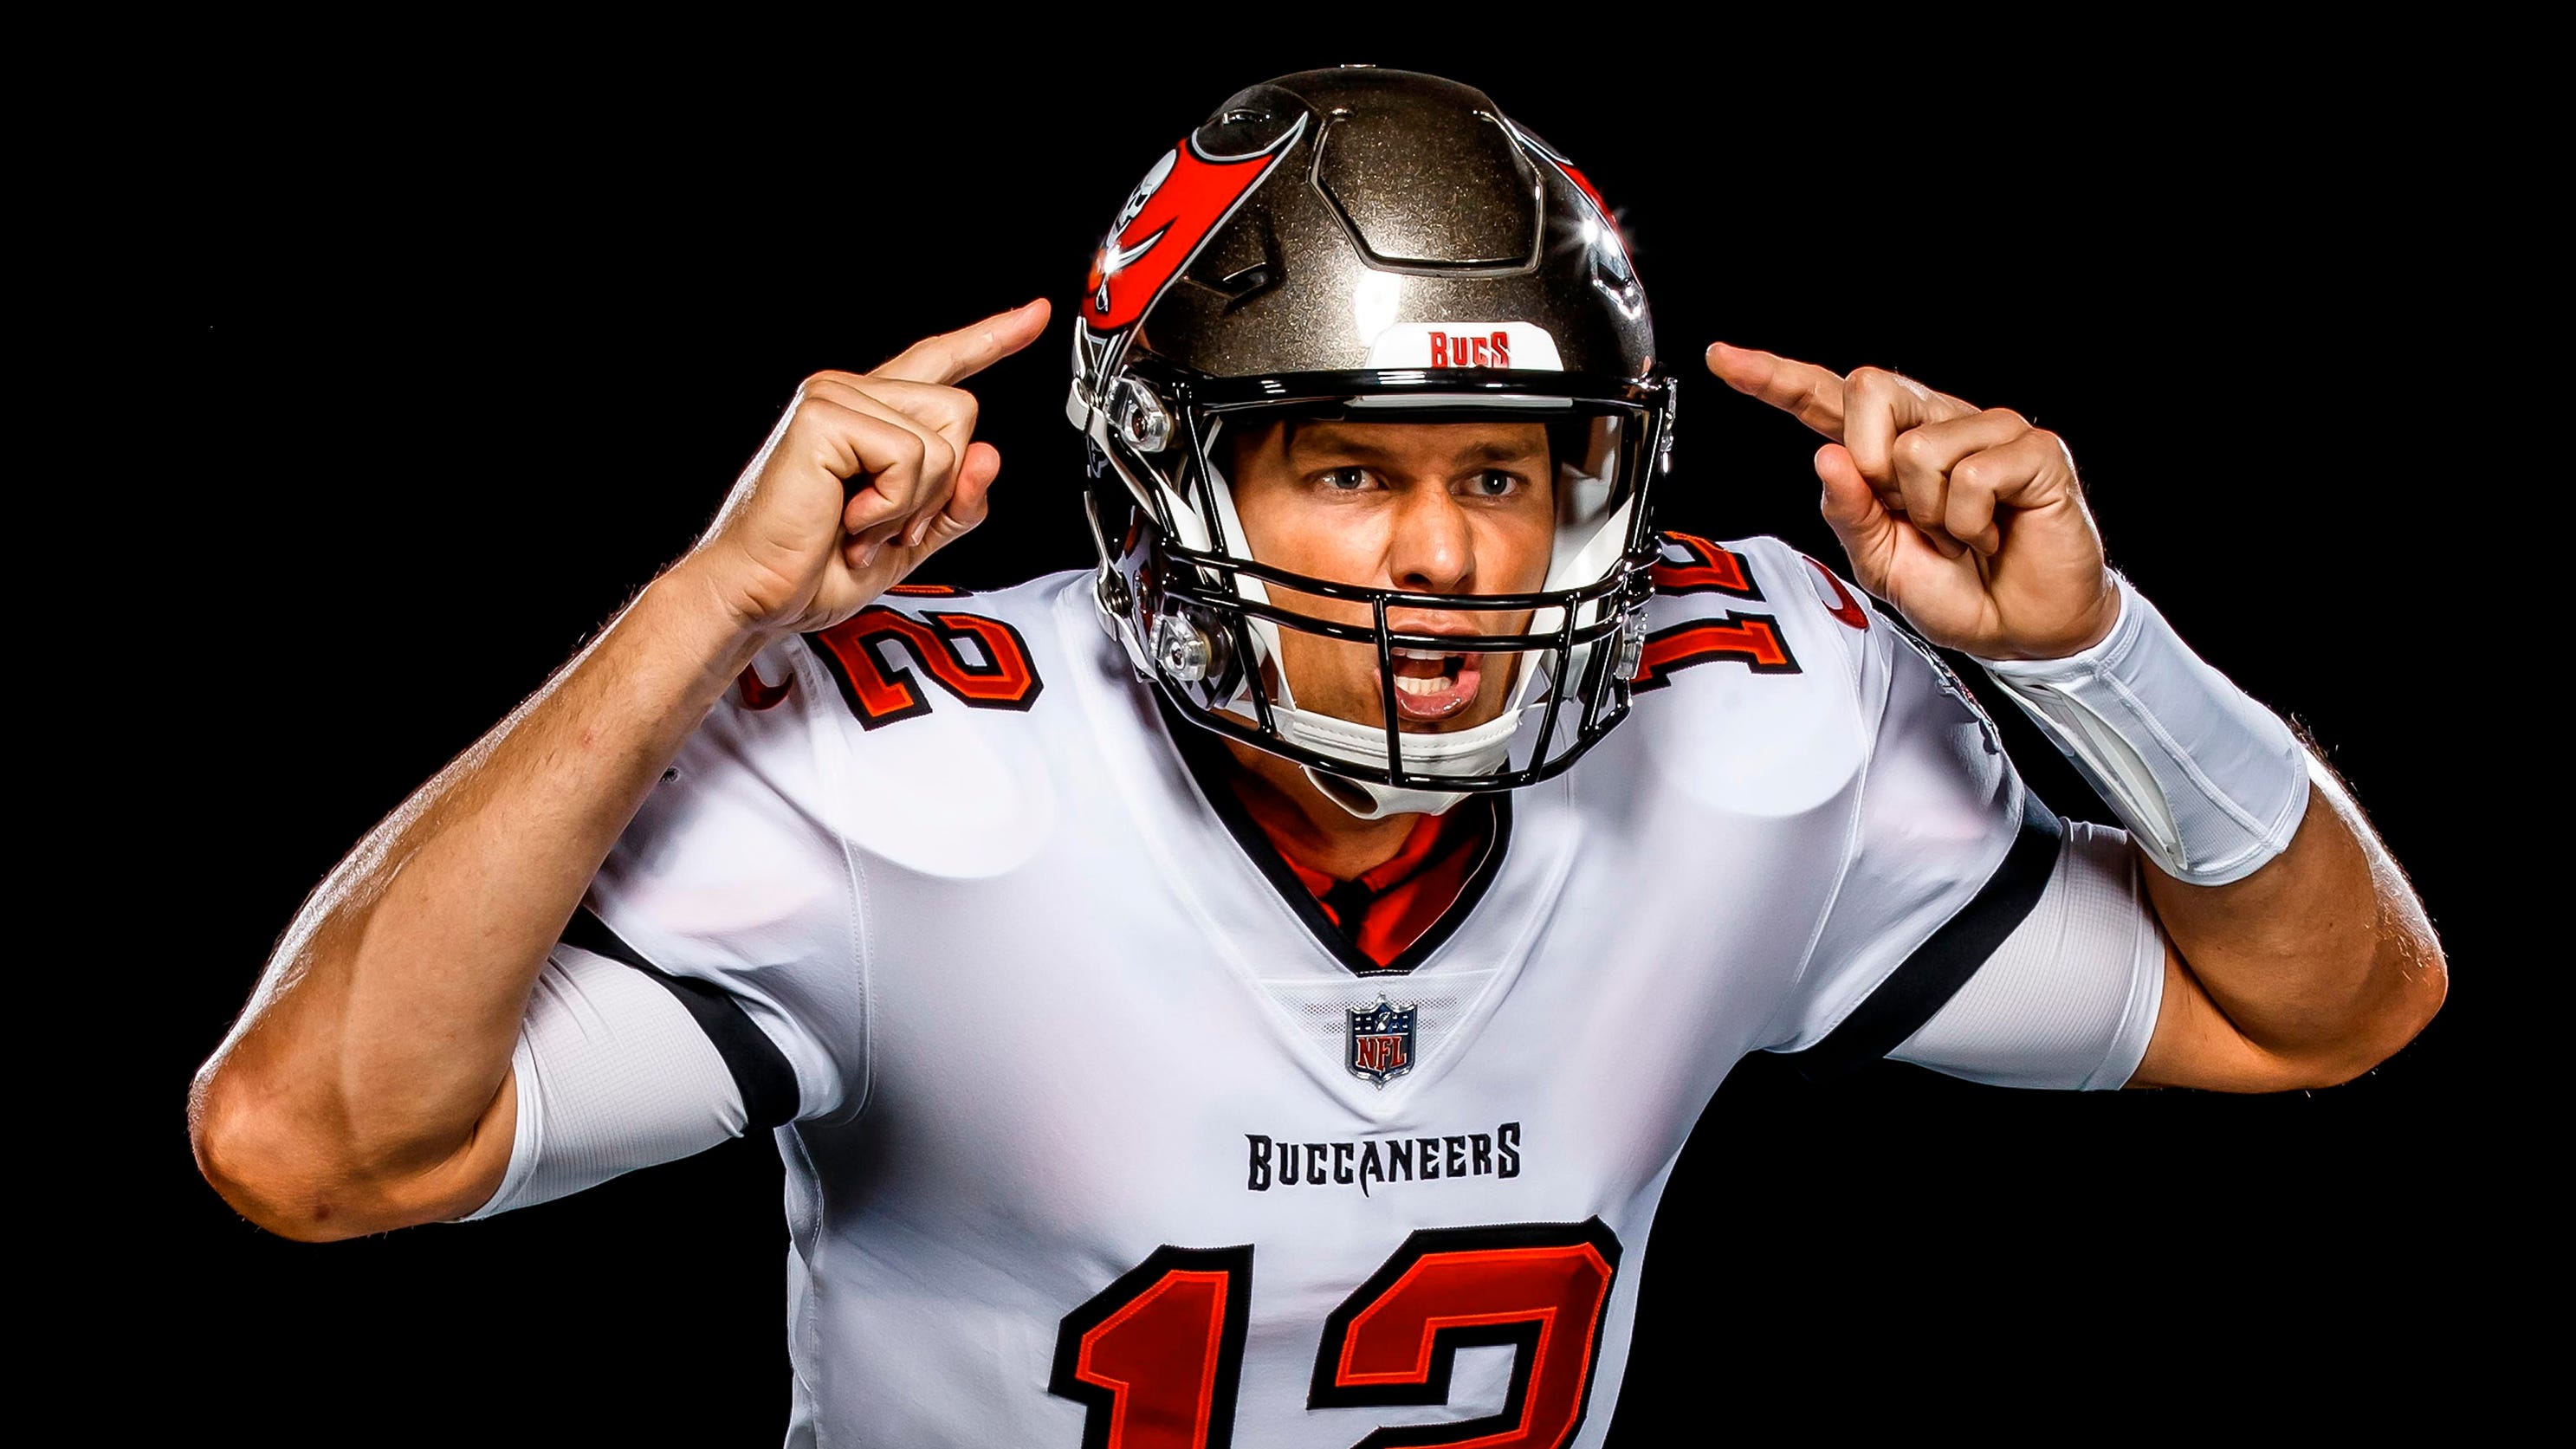 Tom Brady: Buccaneers release first photos of QB in new uniform